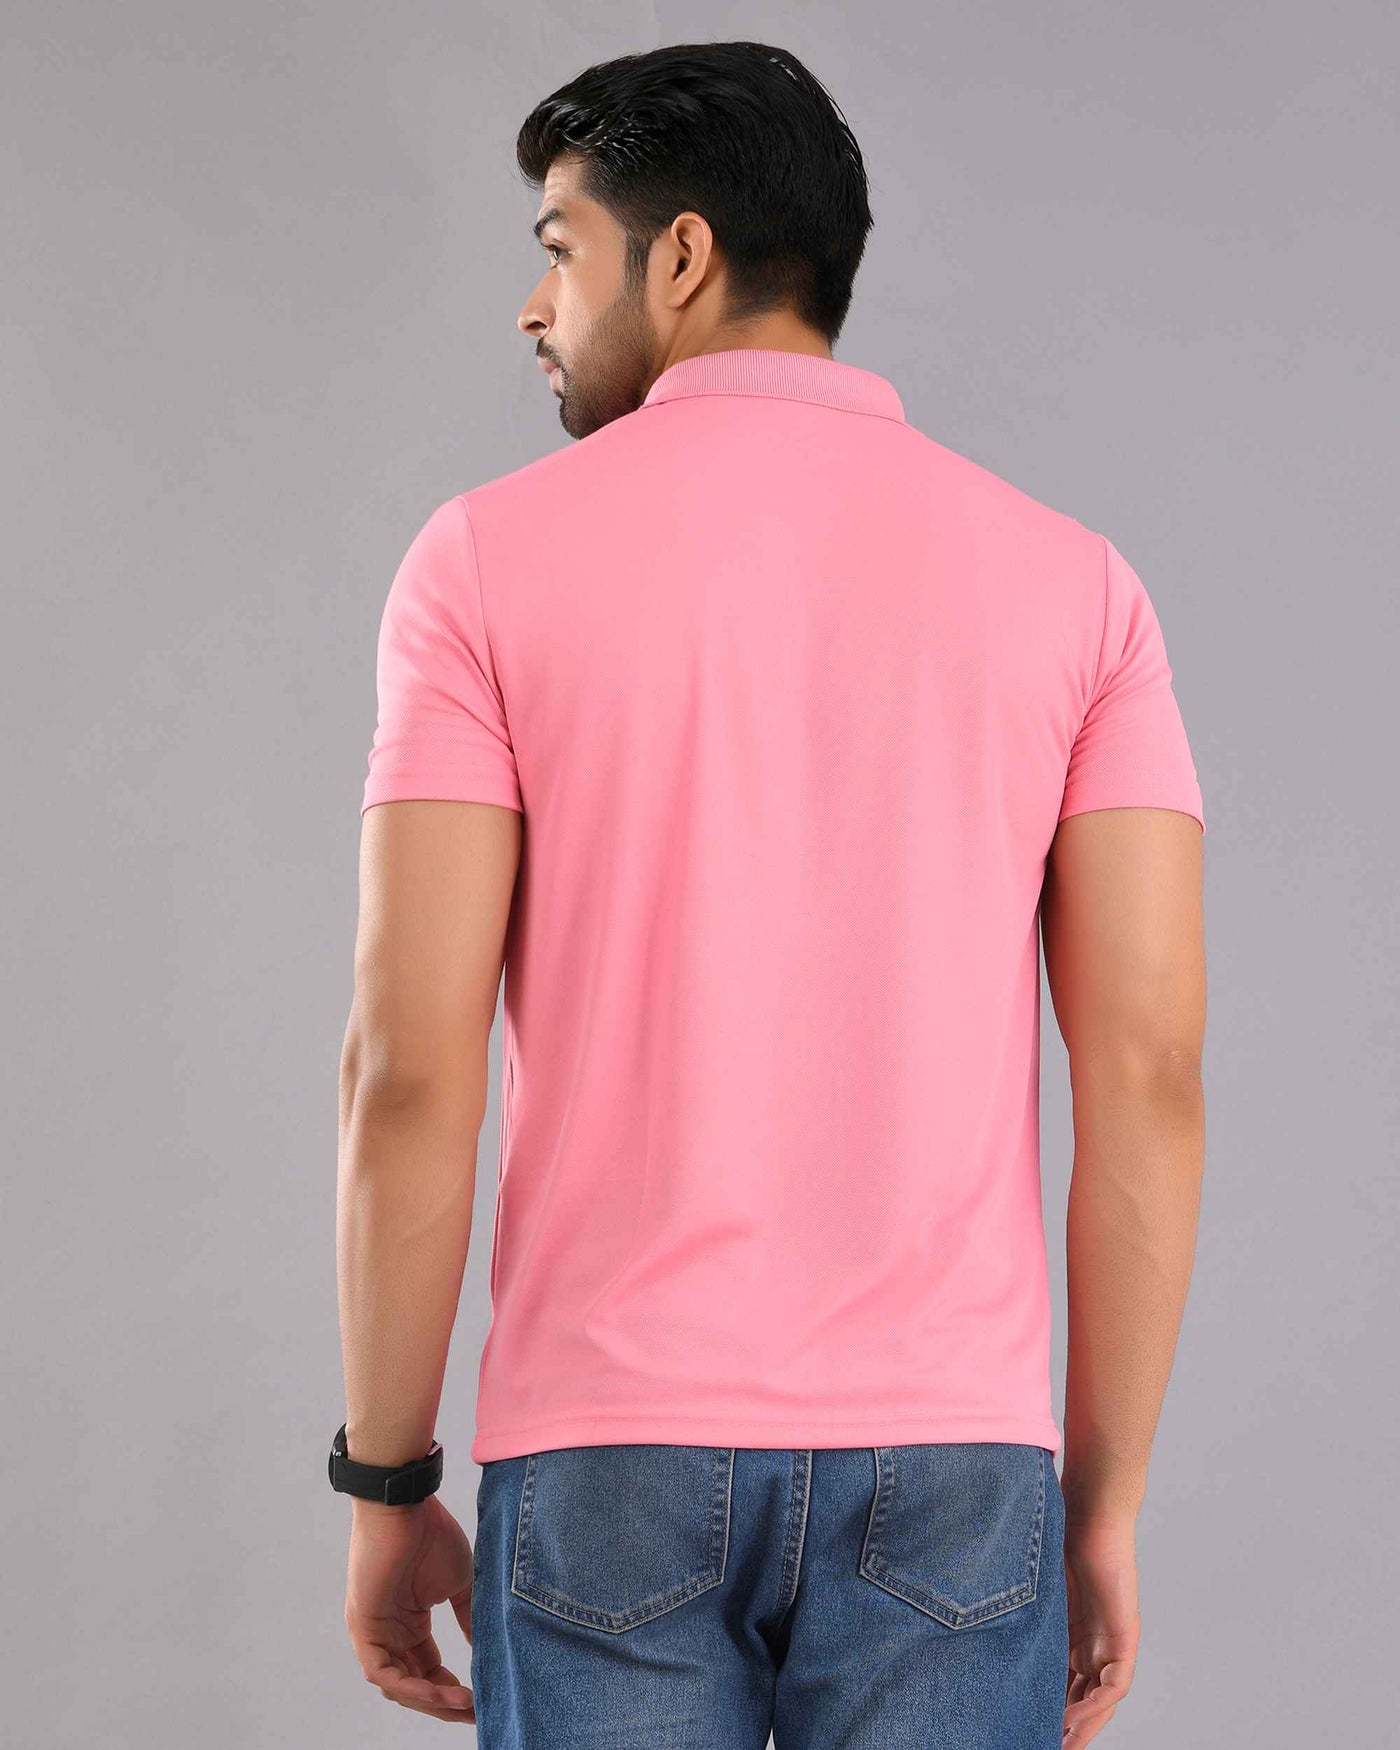 Dry Fit Pink Polo T-Shirt